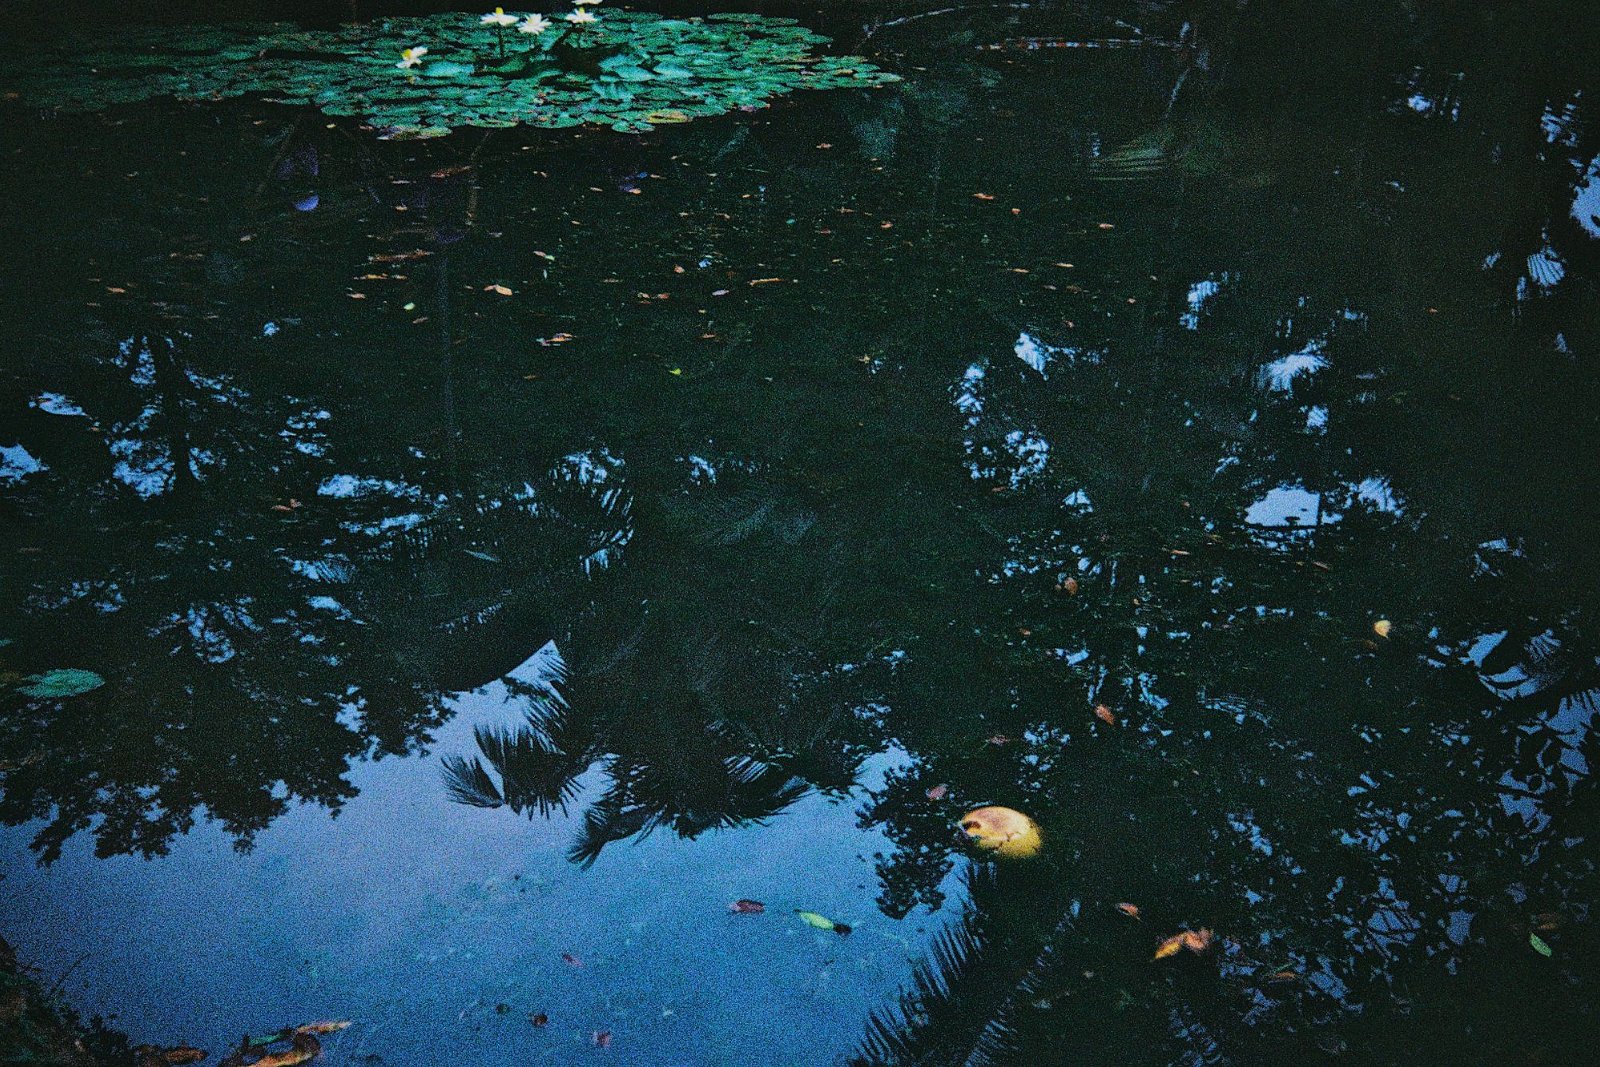 Film photo by me, taken sometime last year at a local park. But only recently developed it in Q2. 
(Fujica MF, Kodak Ultramax 400)